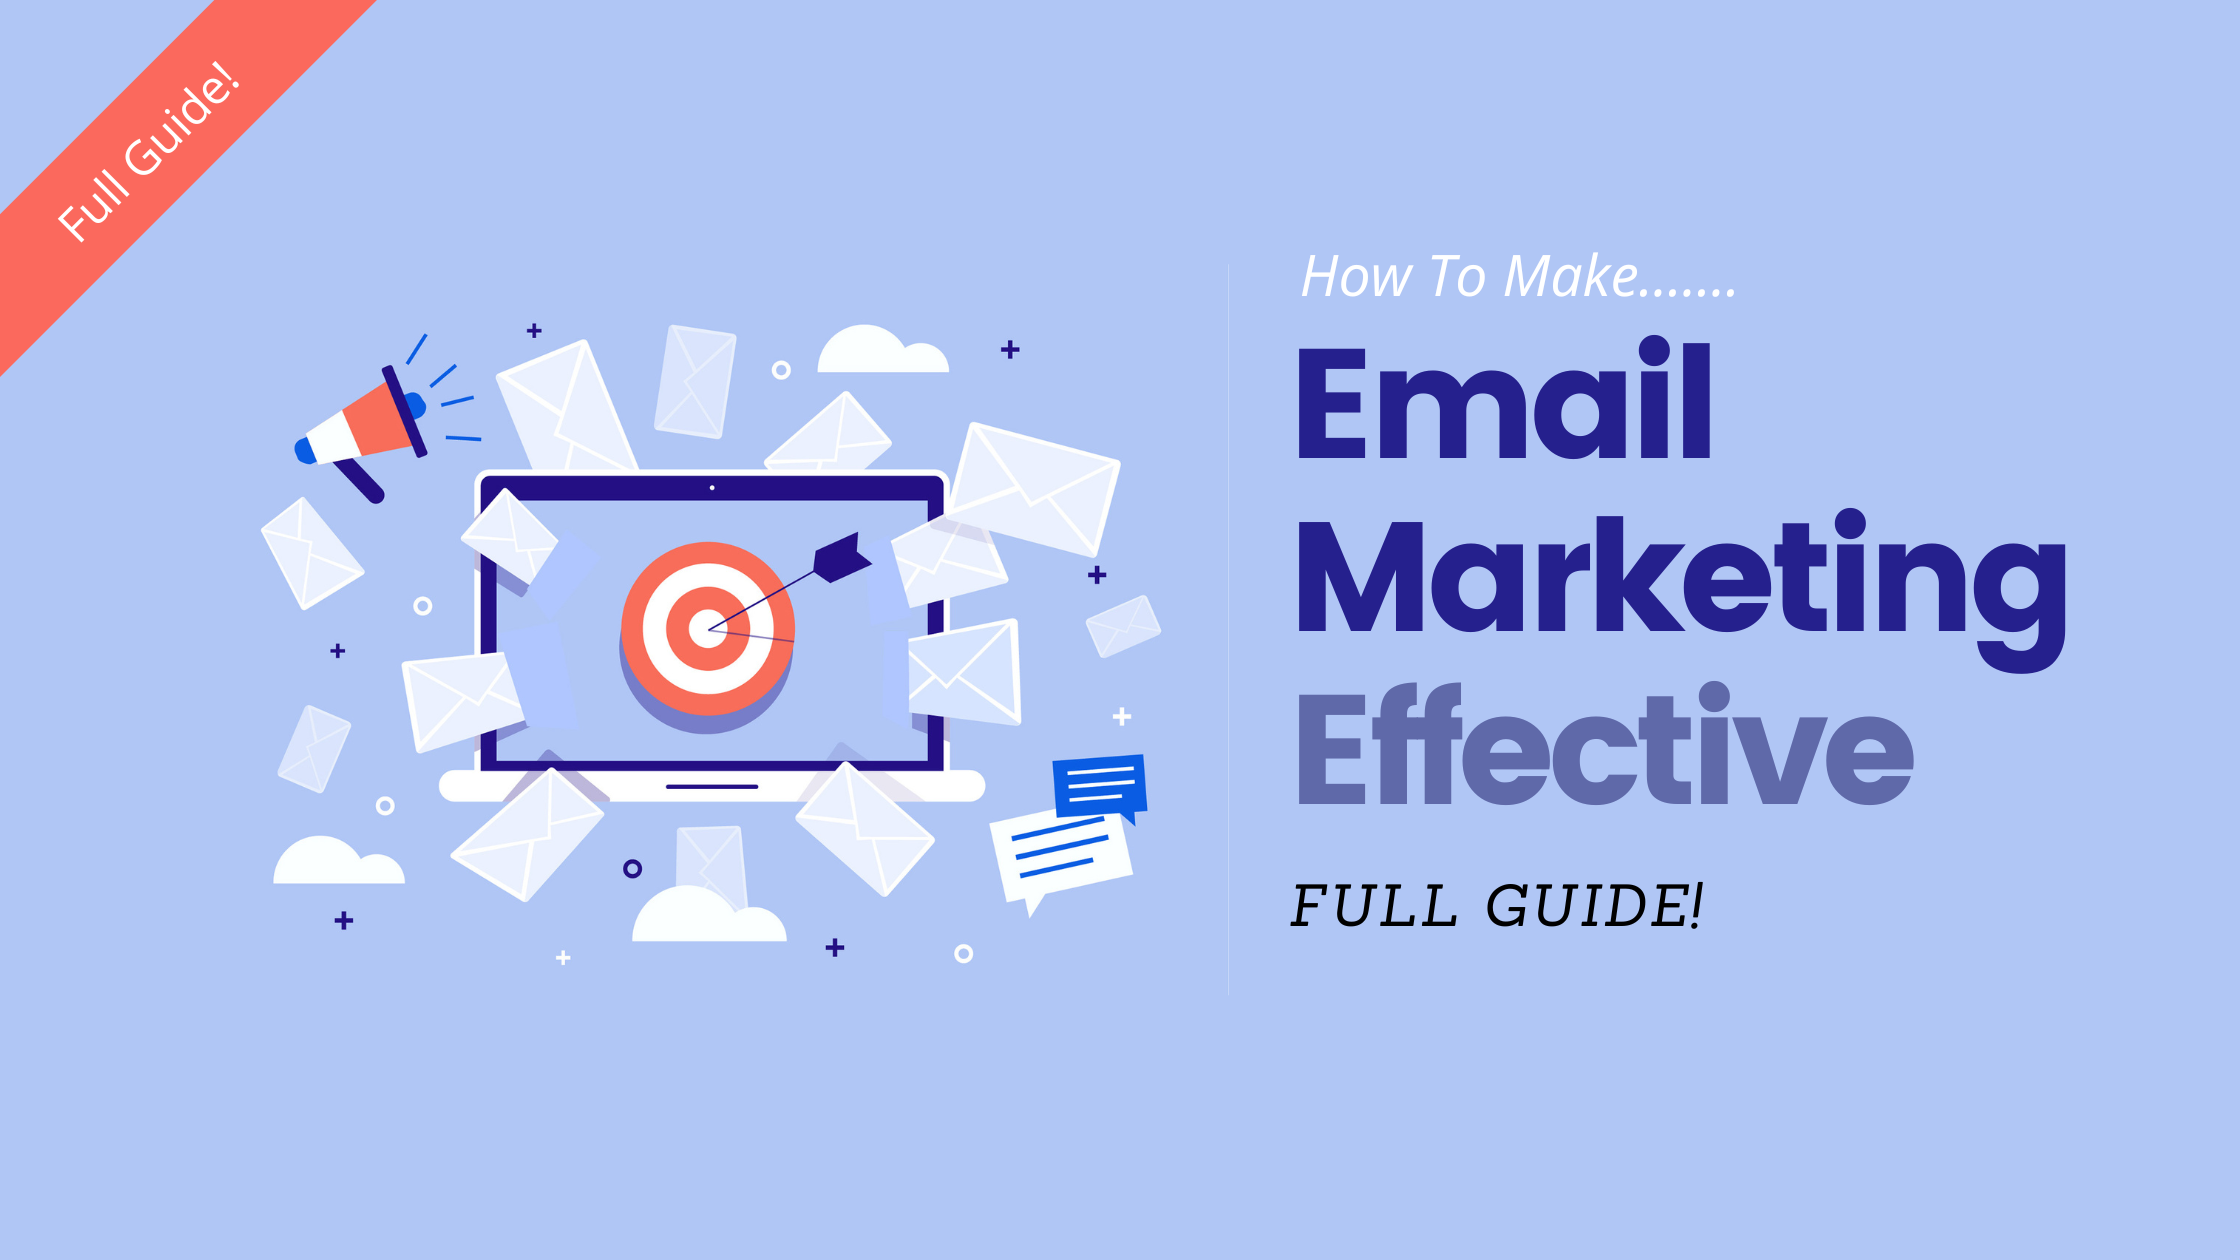 How to Make Email Marketing Effective